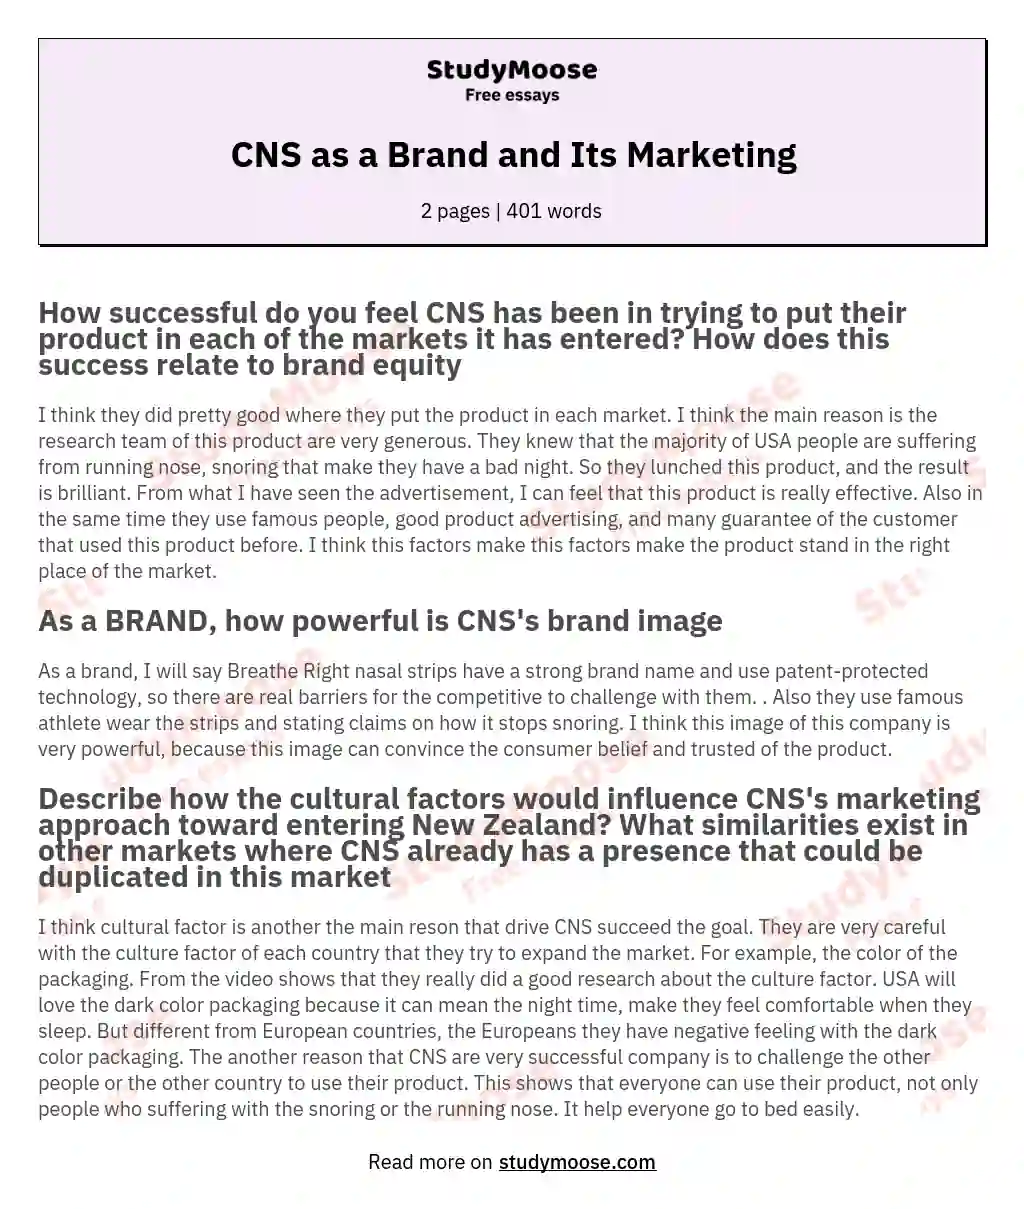 CNS as a Brand and Its Marketing essay